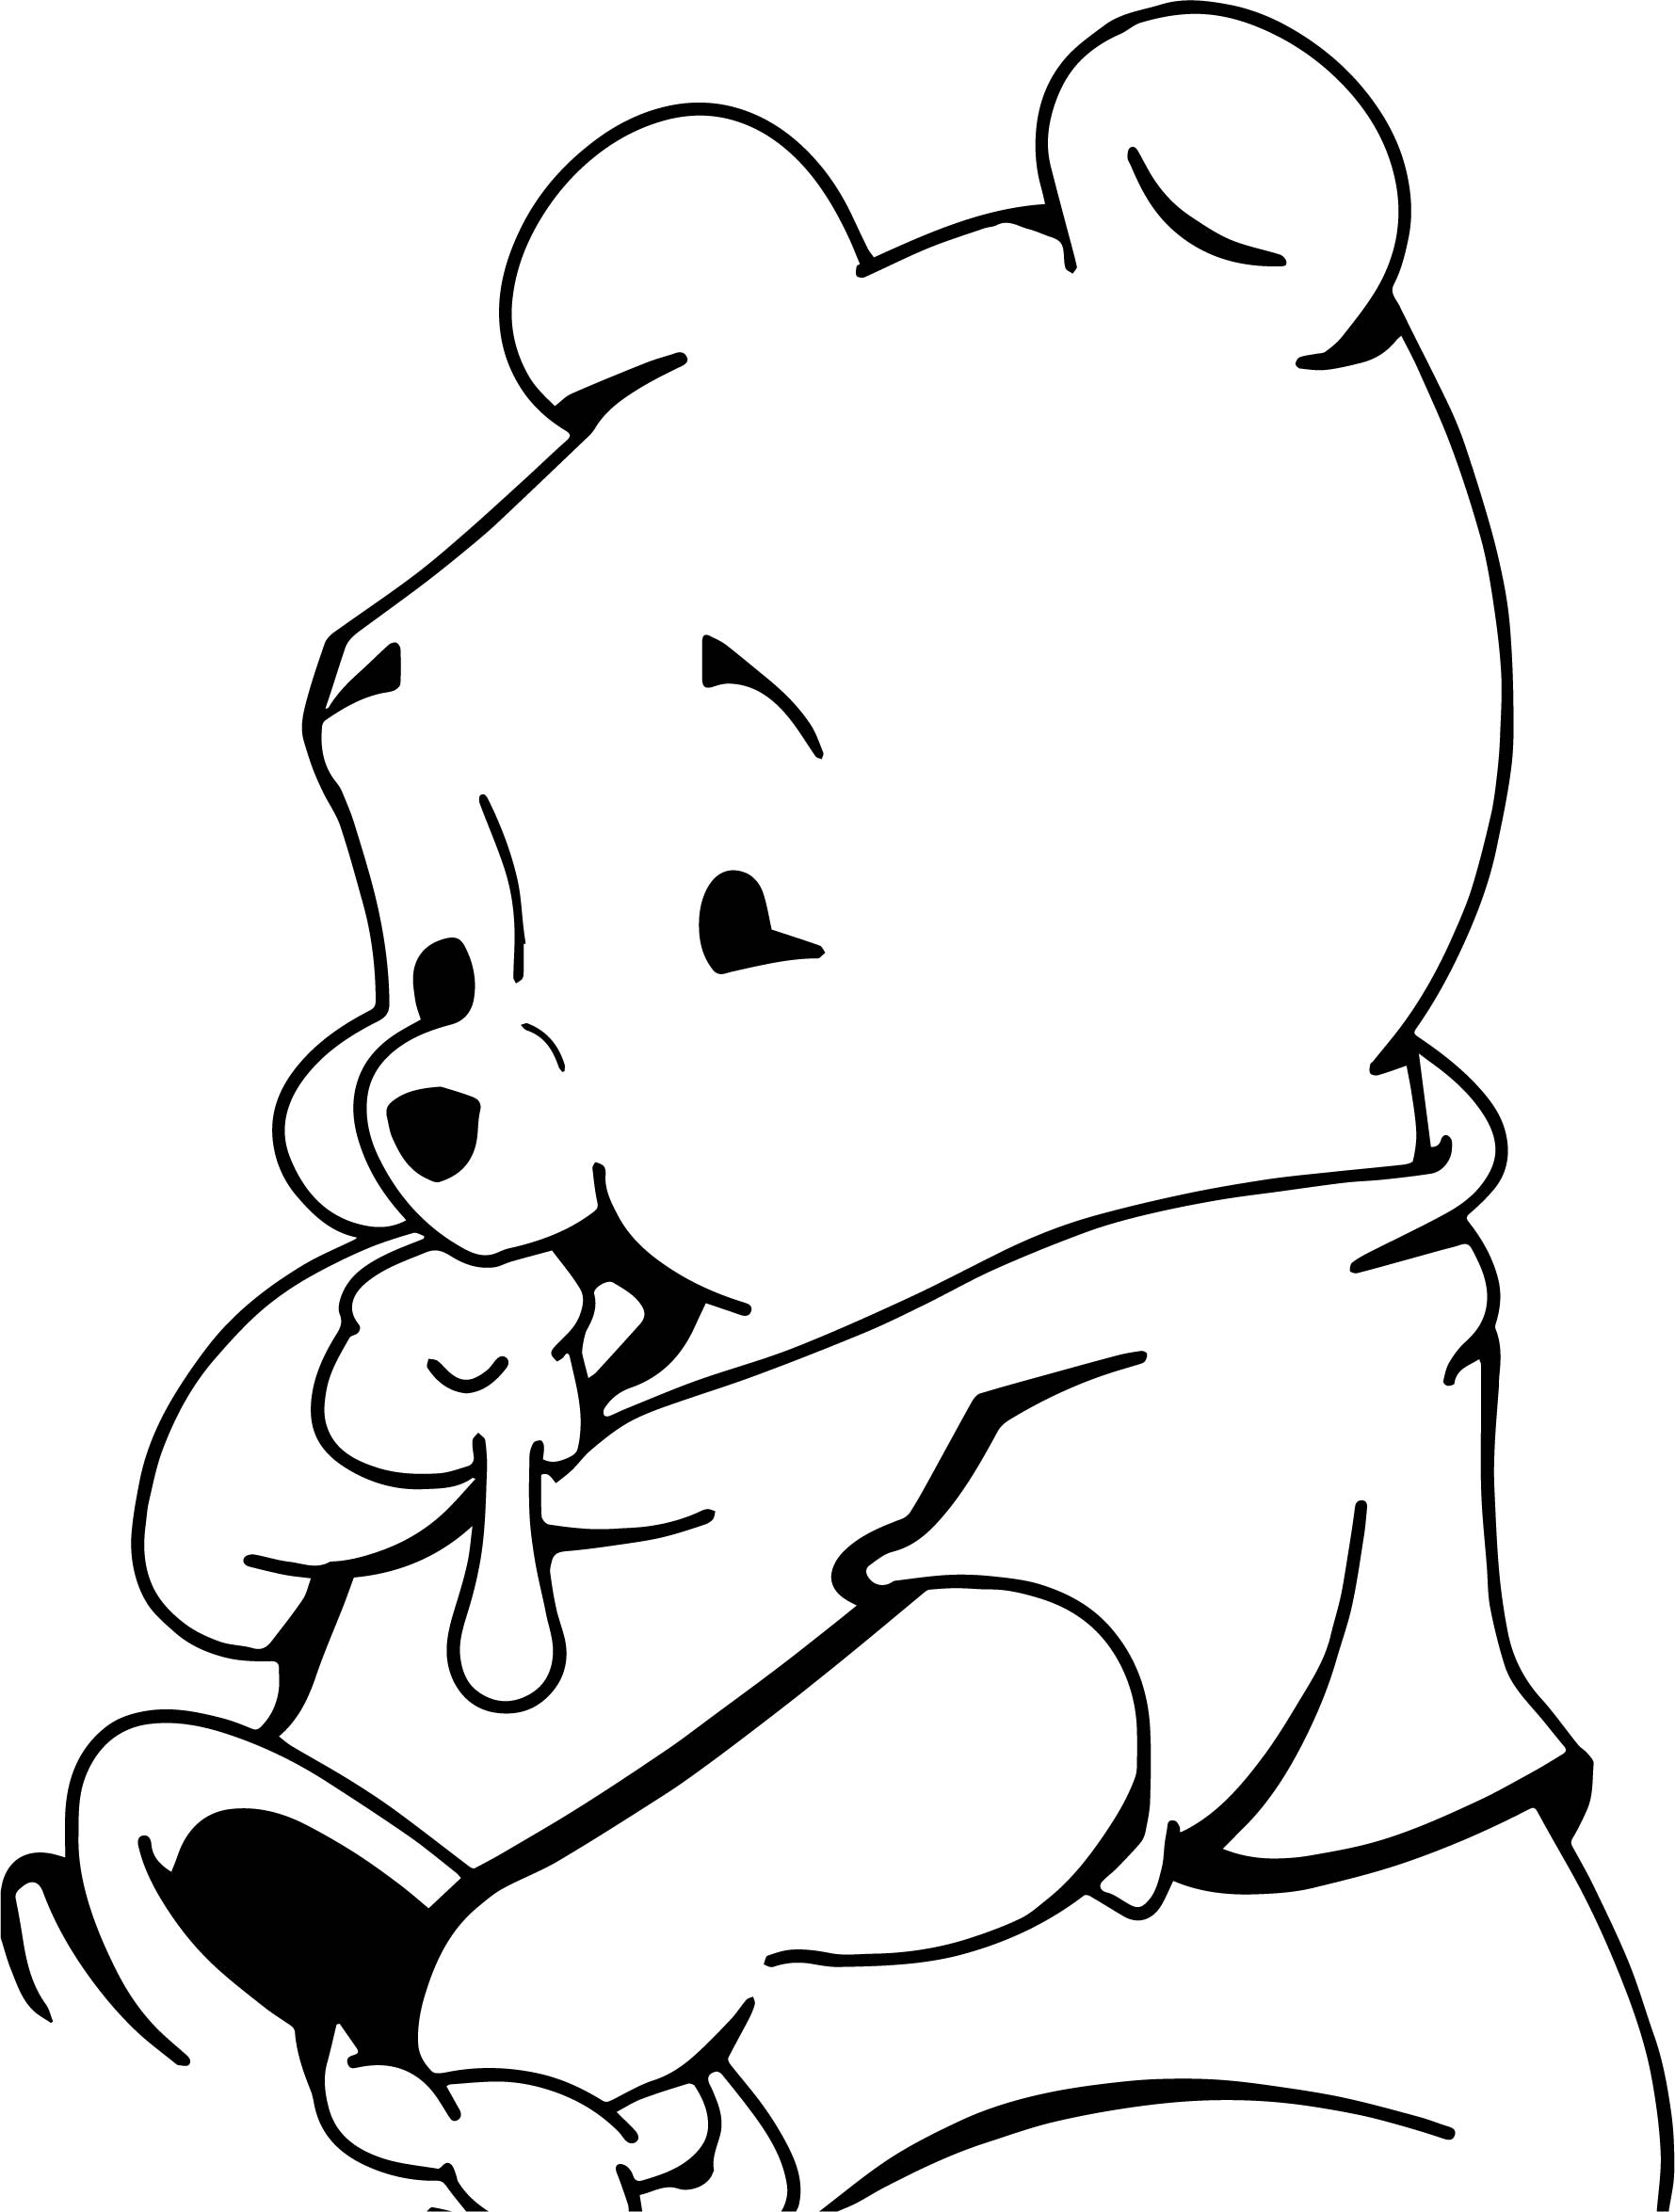 pooh bear coloring pictures cheerful winnie the pooh bear dancing coloring page h coloring bear pooh pictures 